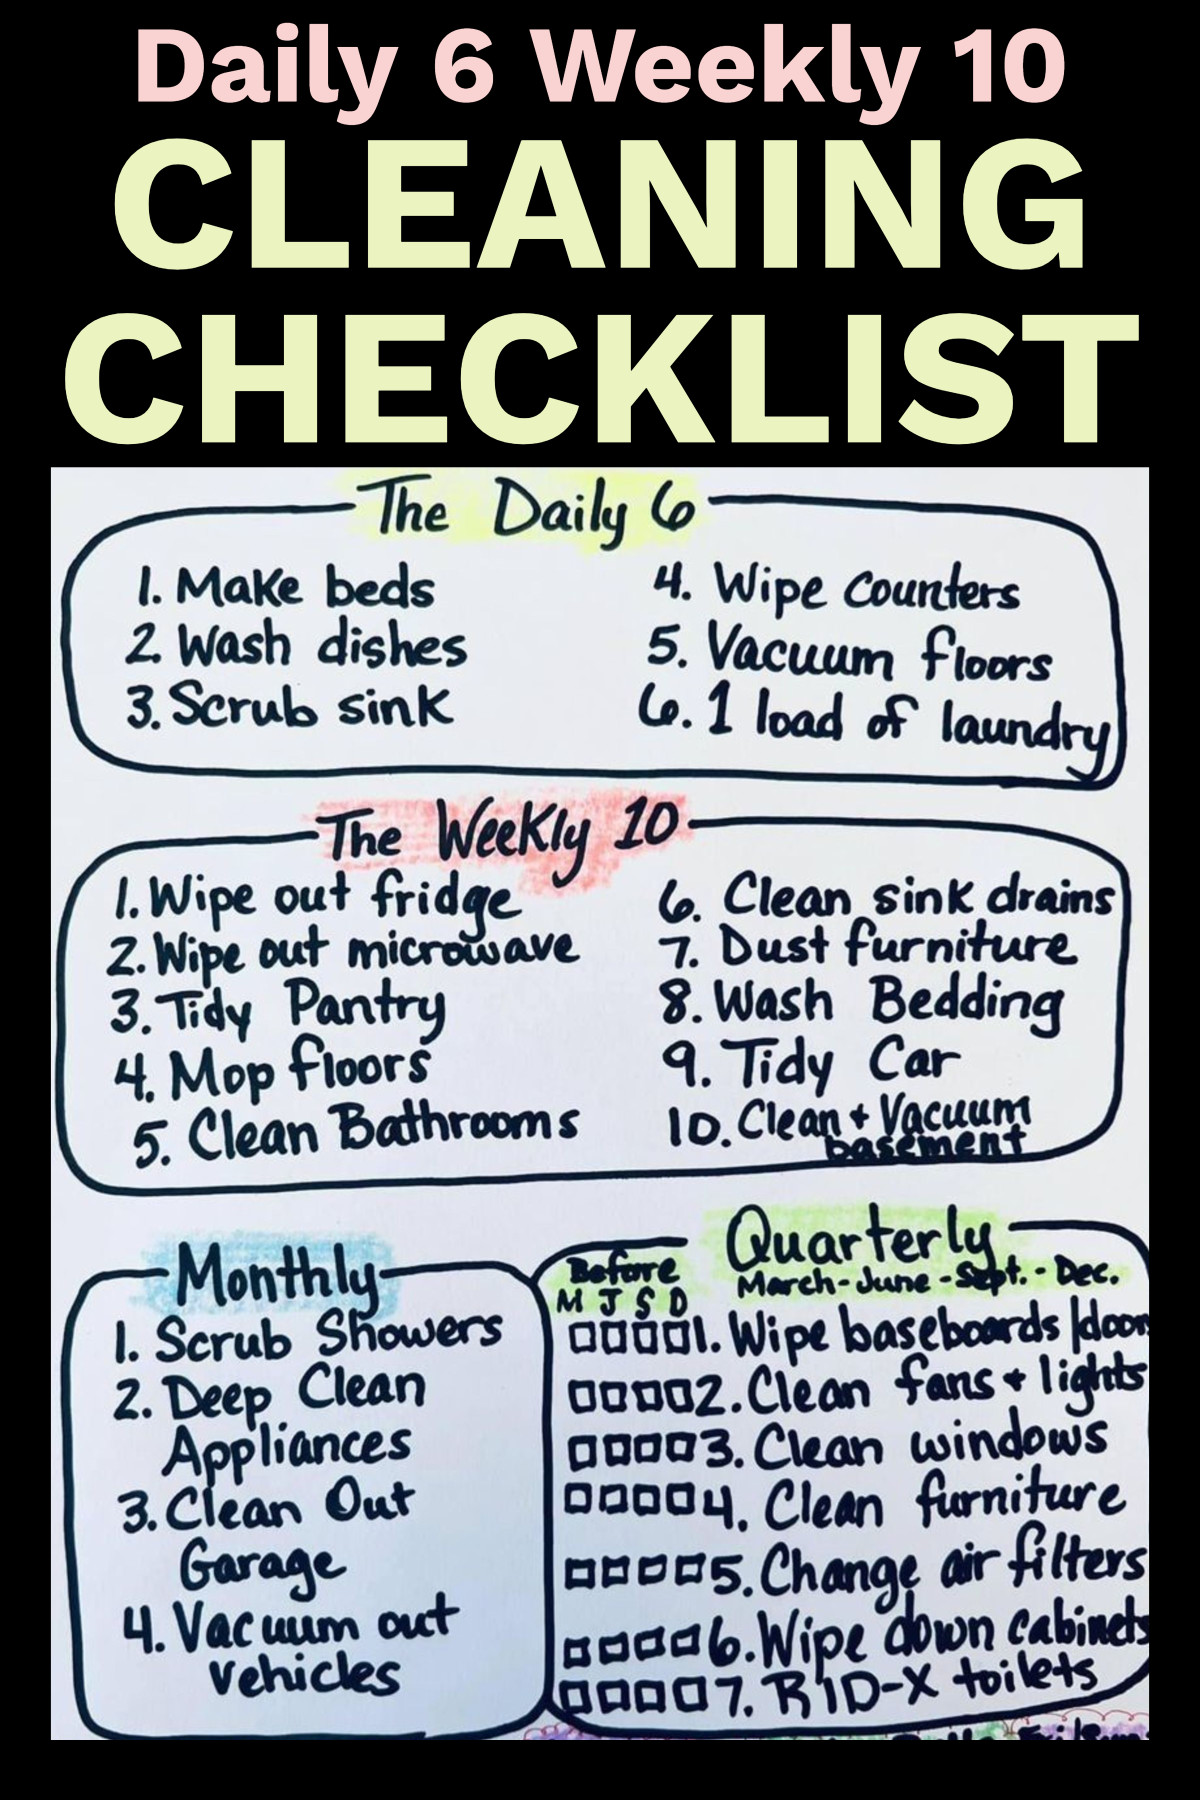 Daily 6 Weekly 10 Cleaning Checklist